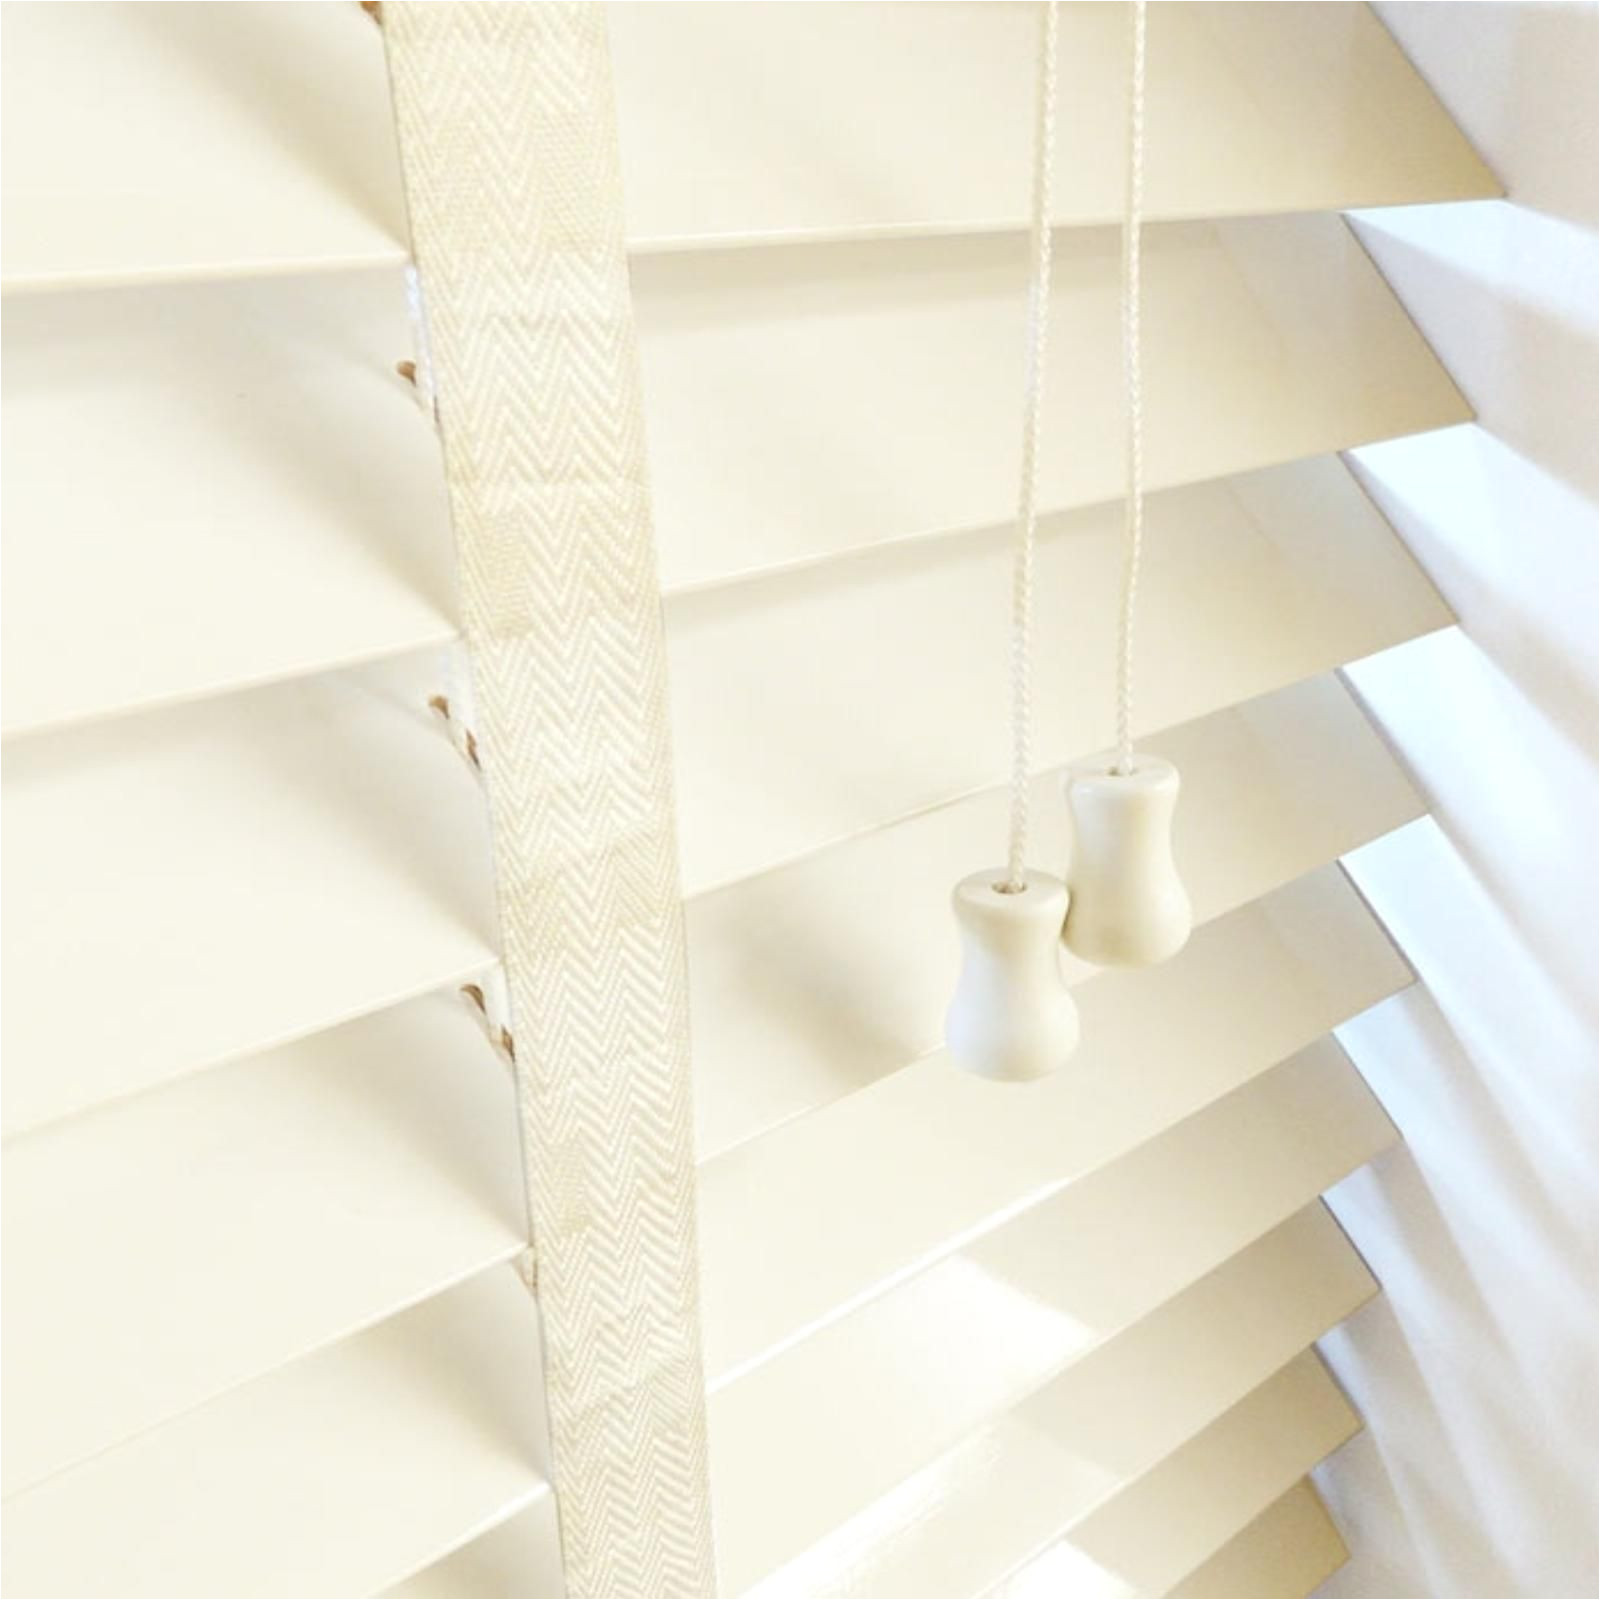 How to Lower Blinds with 3 Strings Express Delivery Wooden